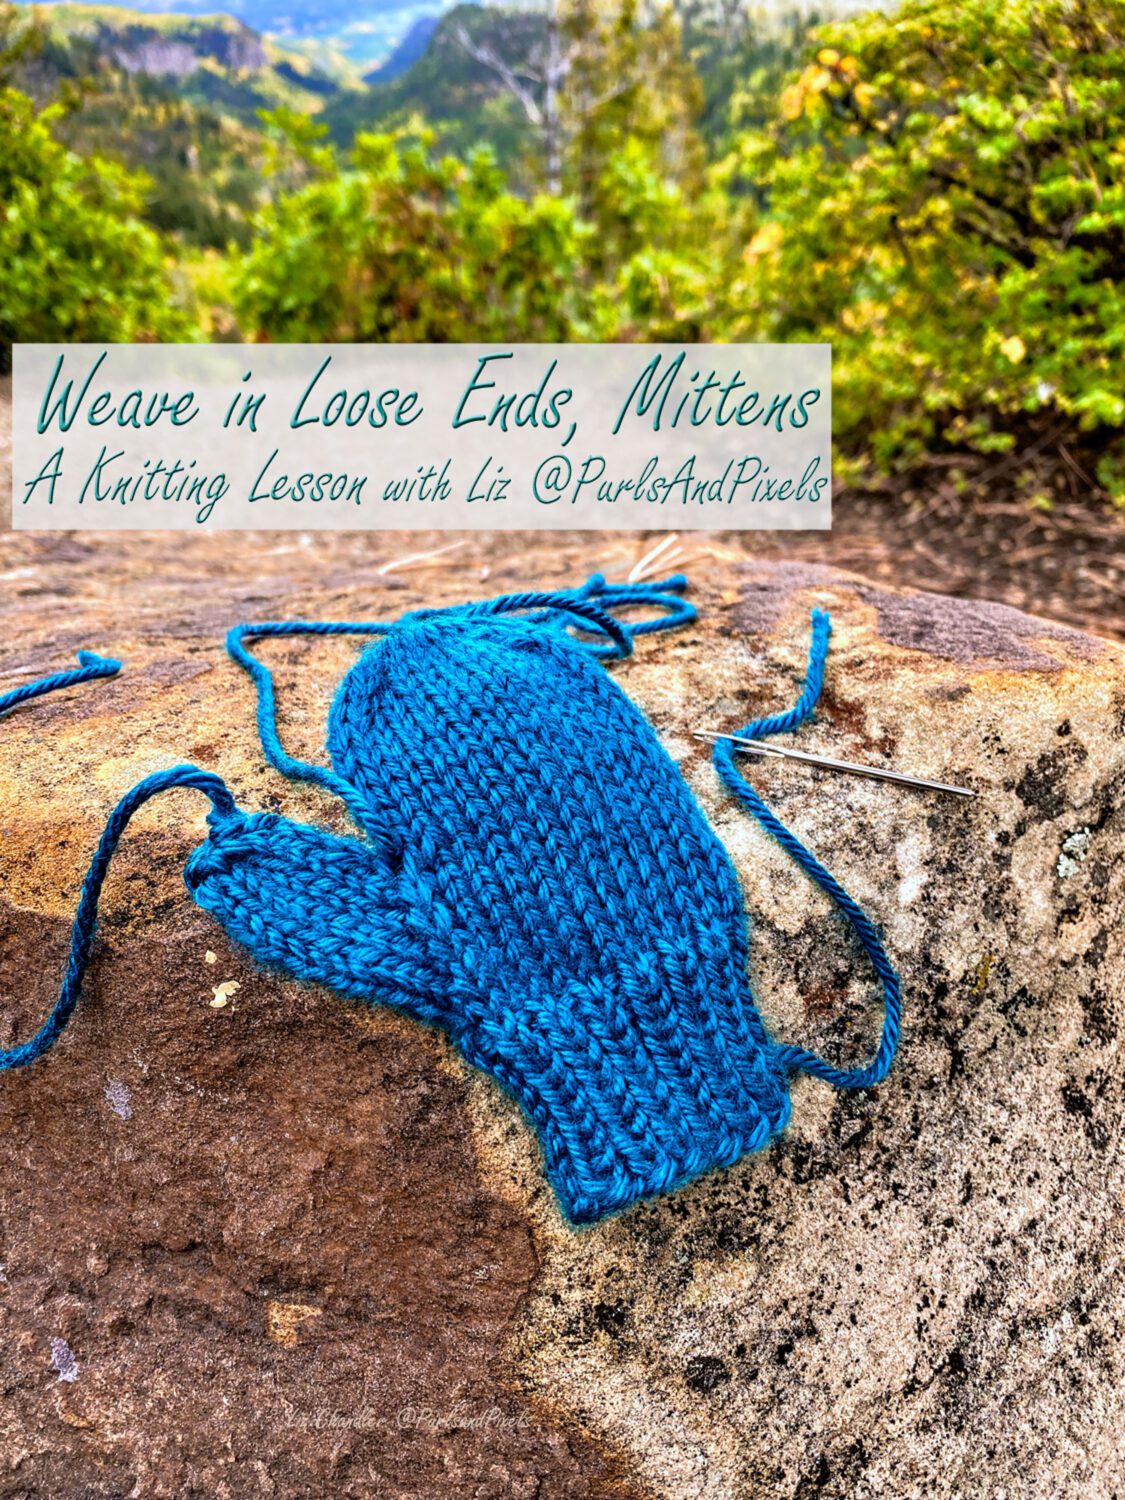 Weave in Loose Ends on Mittens